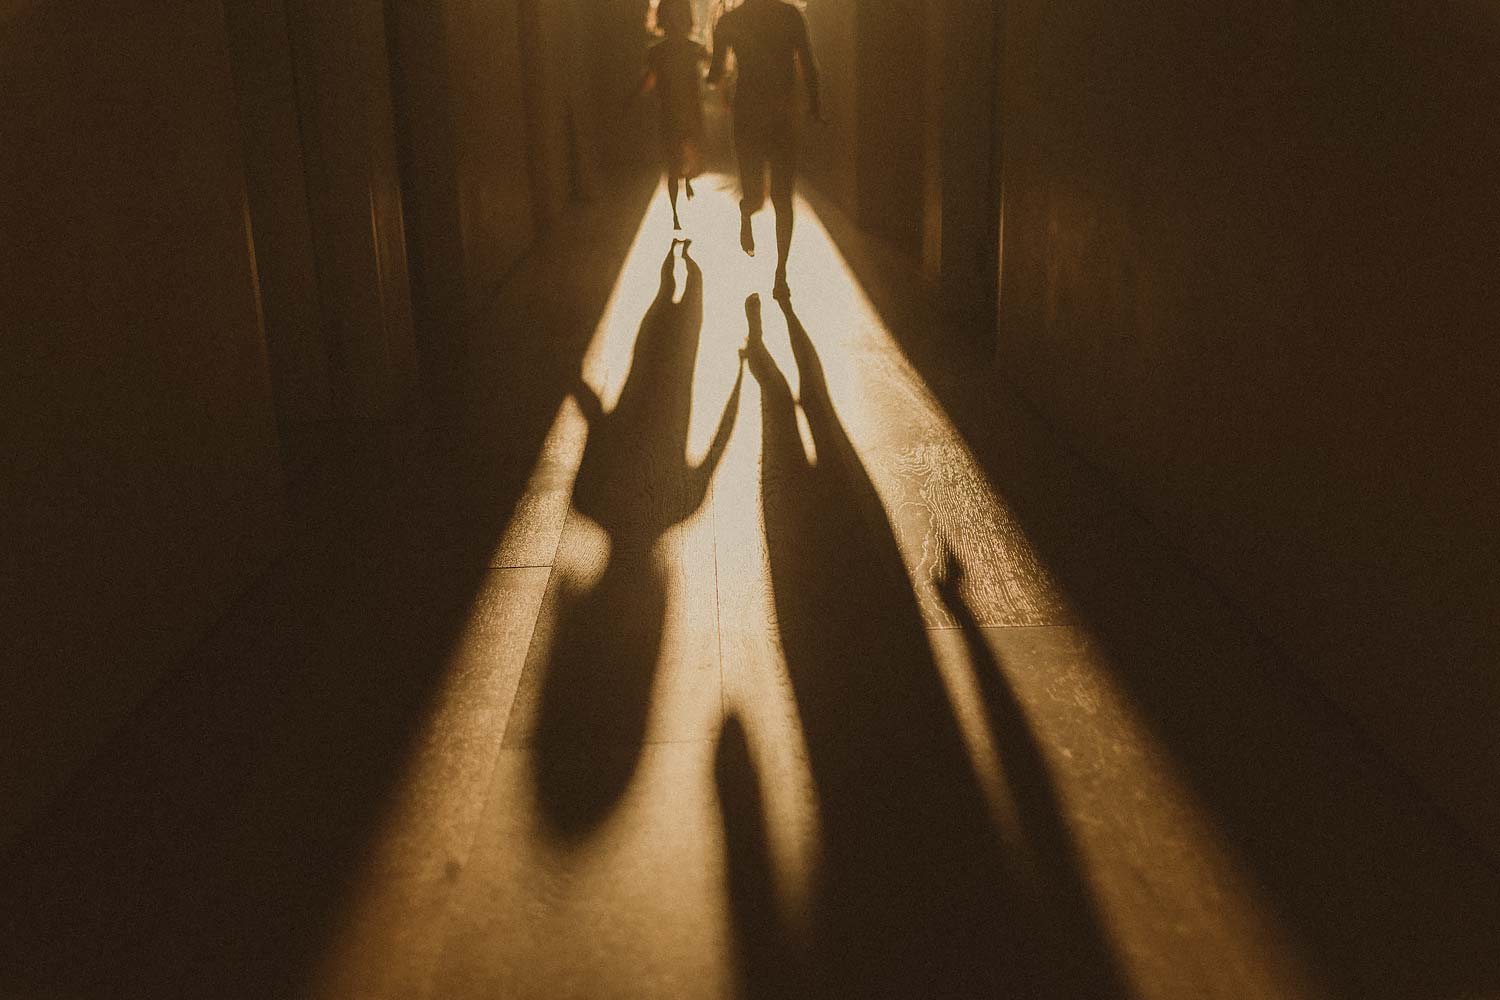 Family-photographer-sydney-two-children-run-playfully-down-a-hallway-towards-camera-casting-shadows-on-the-ground-from-the-sunlight-that-is-backlighting-the-image